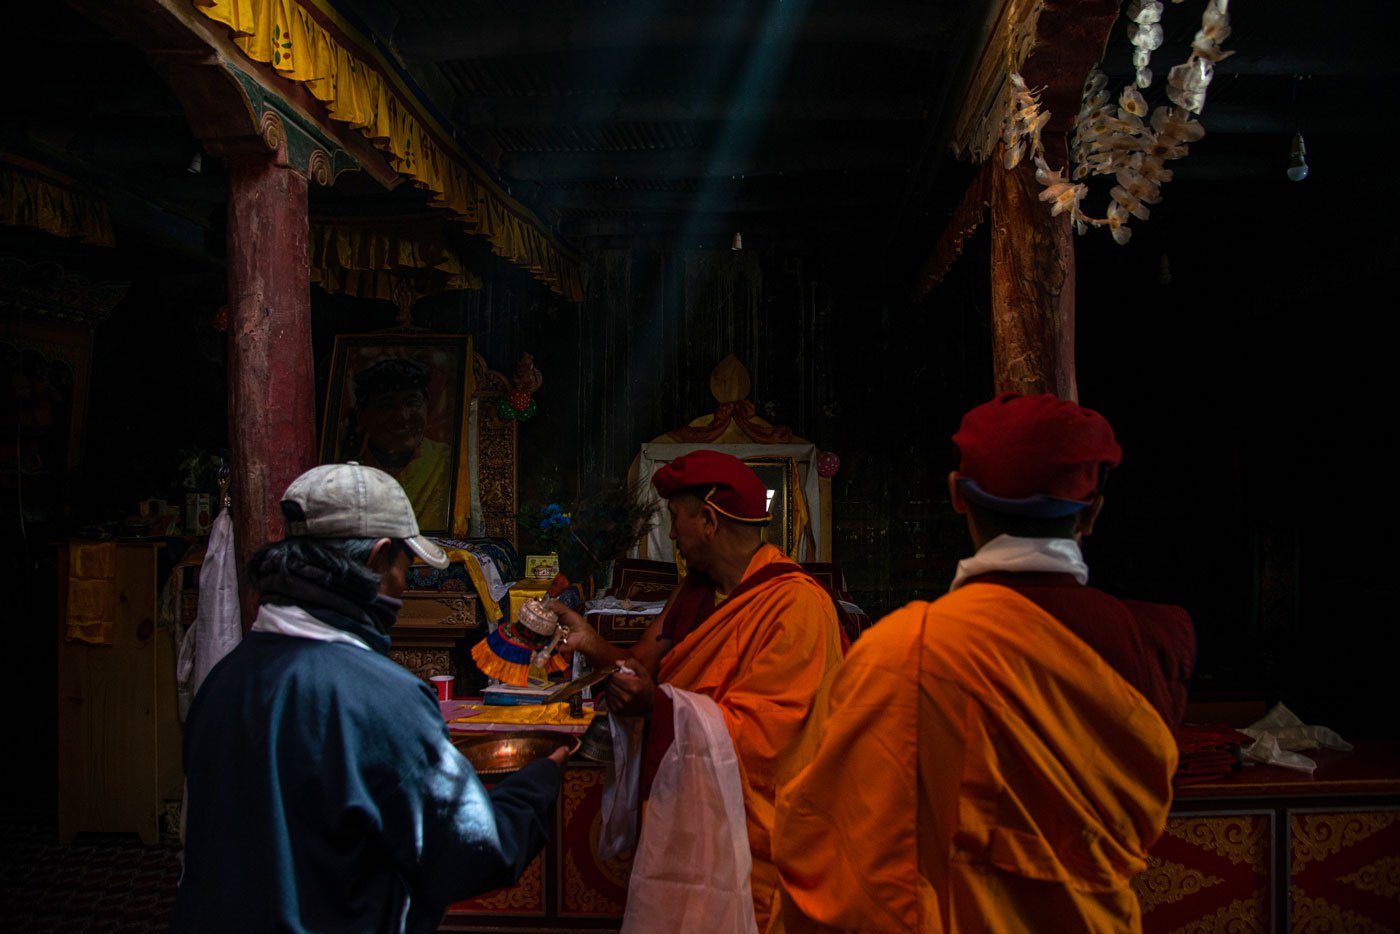 One of Hanle monastery's prominent monks performs rituals on the day of Saga Dawa